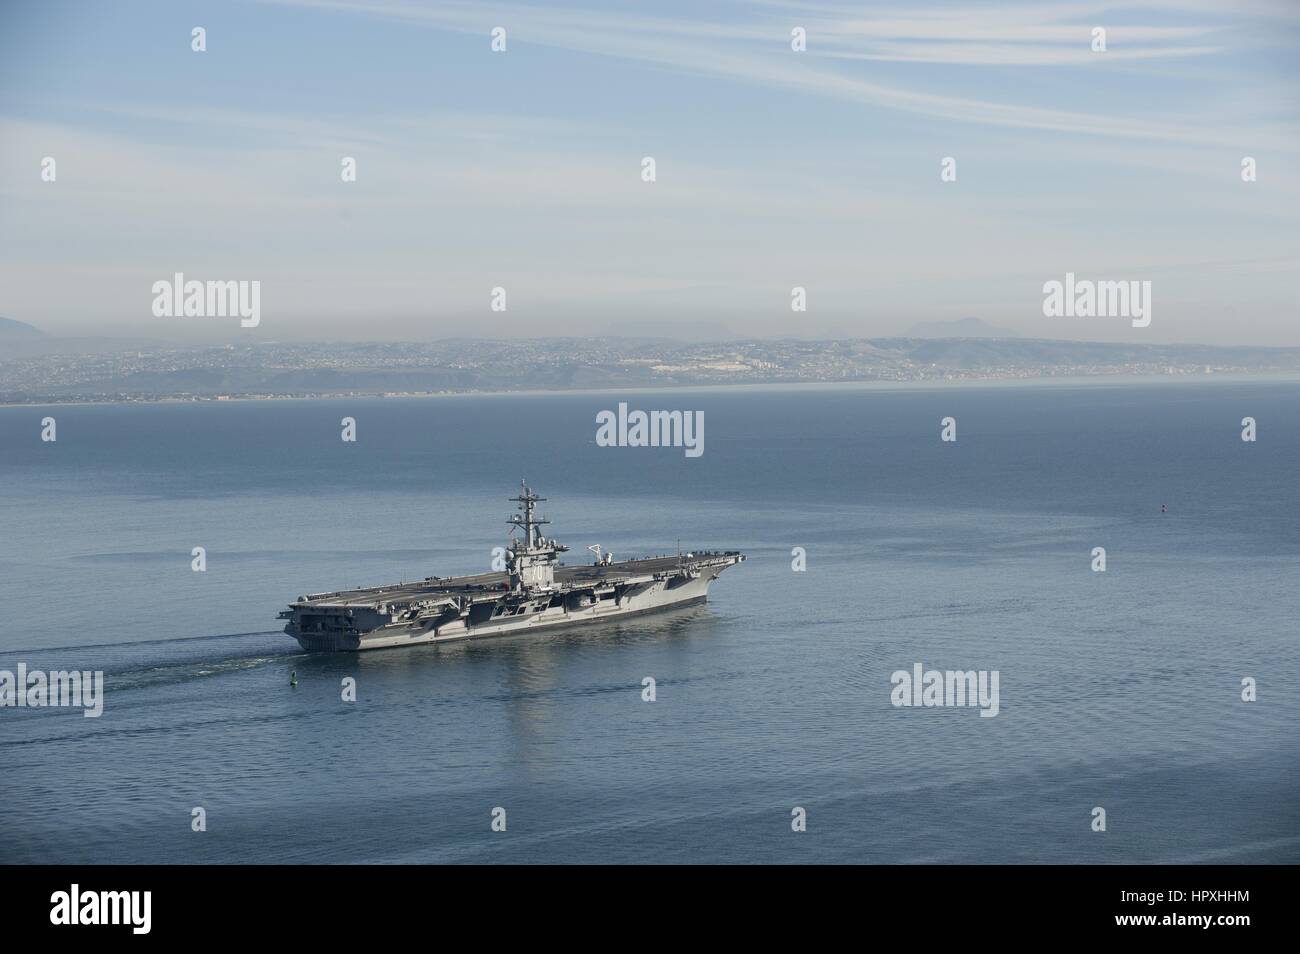 The aircraft carrier USS Carl Vinson gets underway from Naval Air Station North Island to conduct sea trials, Pacific Ocean, February, 2013. Image courtesy of Lowell Whitman/US Navy. Stock Photo